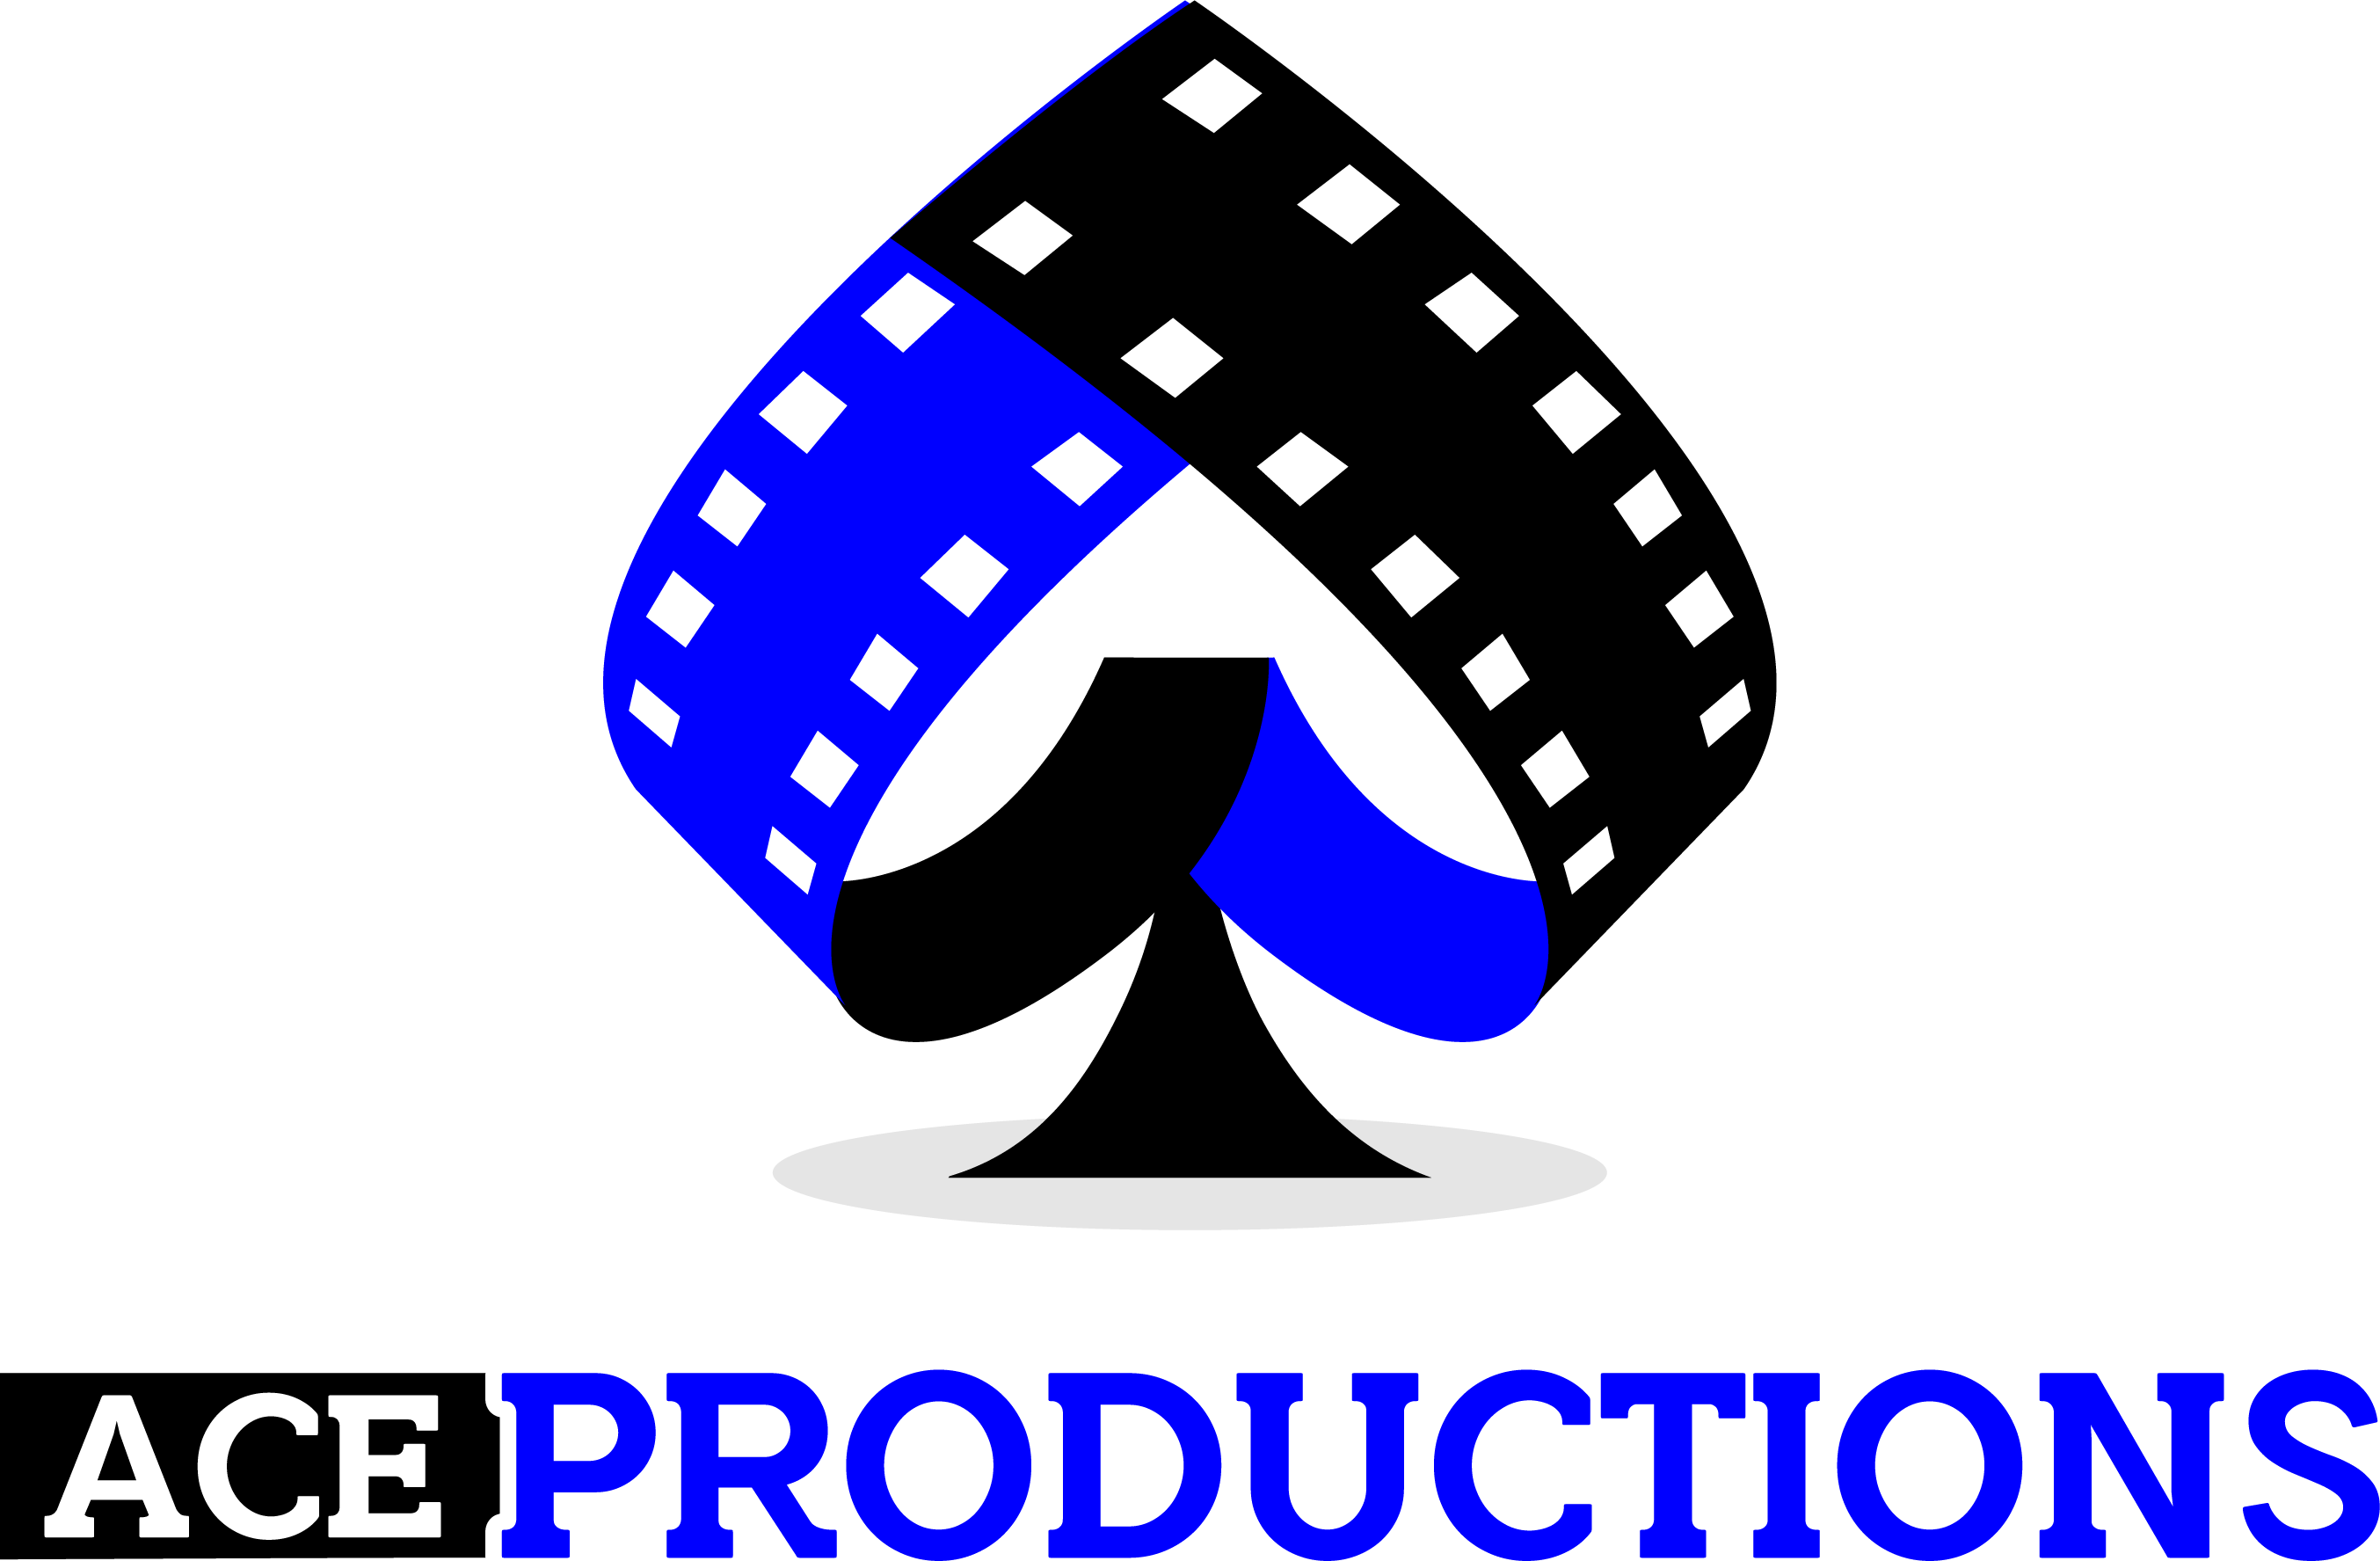 Ace Productions